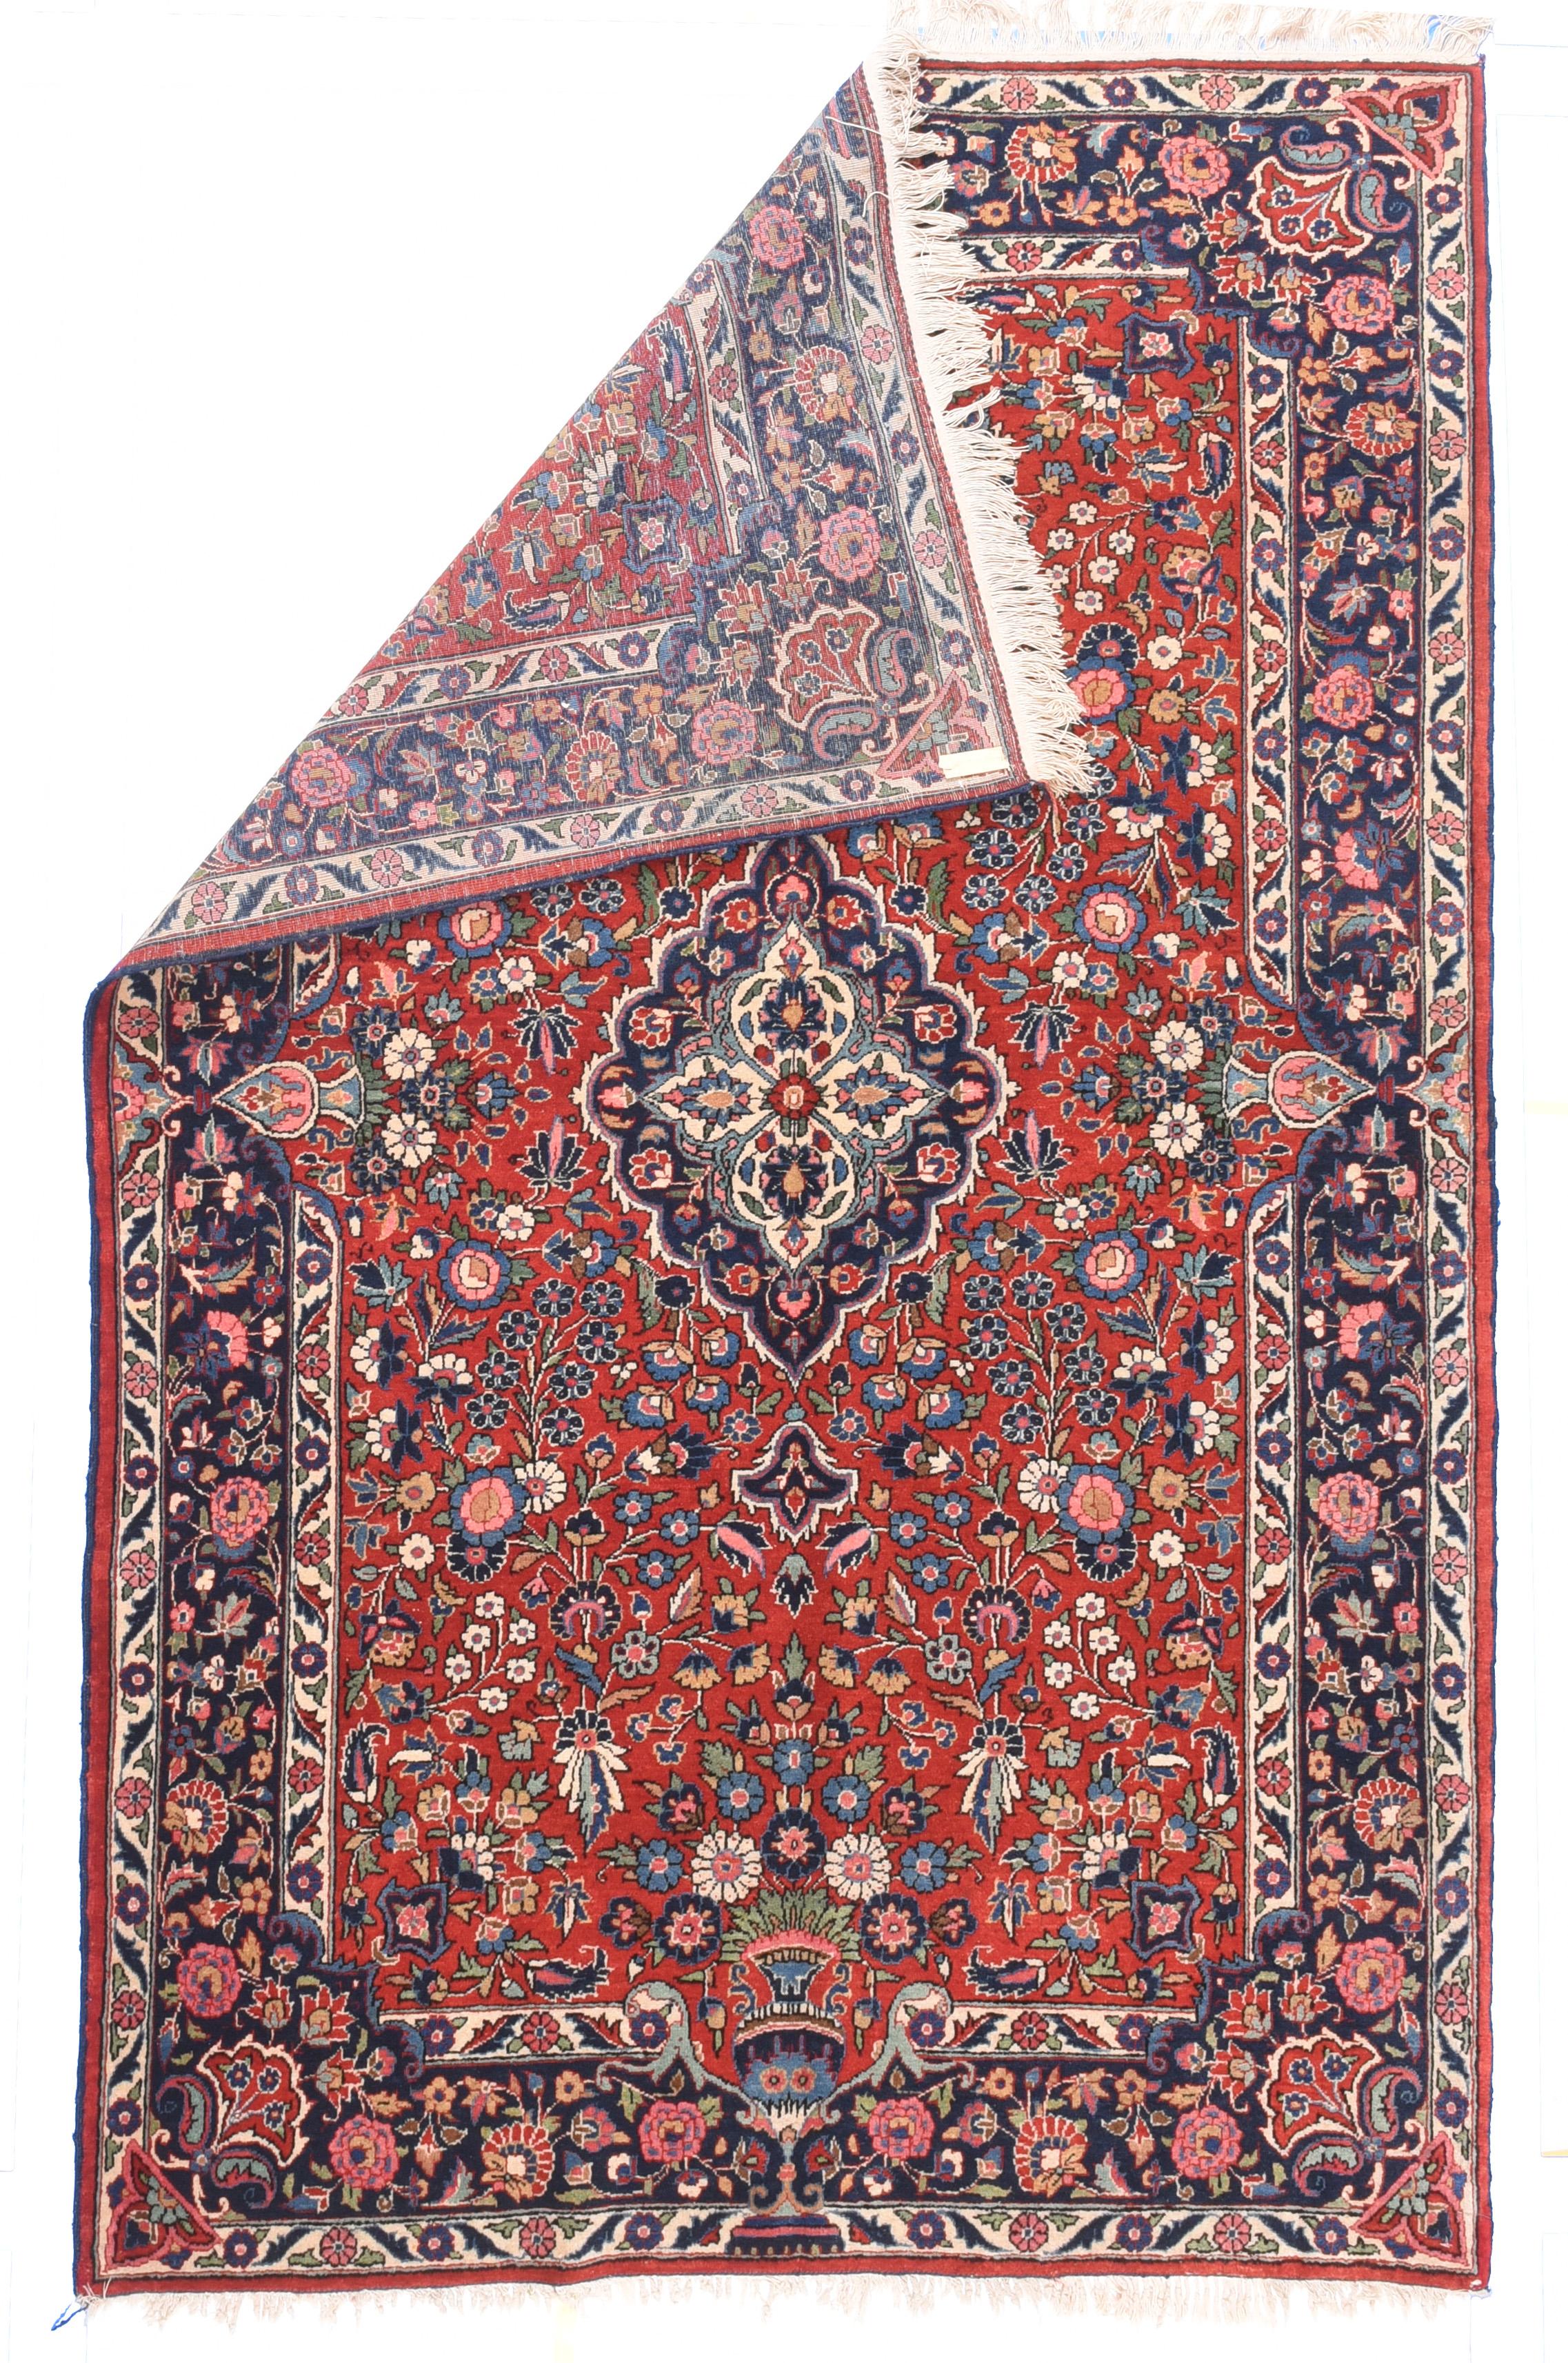 Antique Persian Kashan Rug 4'4'' x 6'10''. The crisp red field, with a wide variety of Persian garden flowers, flows around the small lightly scalloped navy medallion with reduced pendants, and is invaded by vases and floral bouquets from the navy